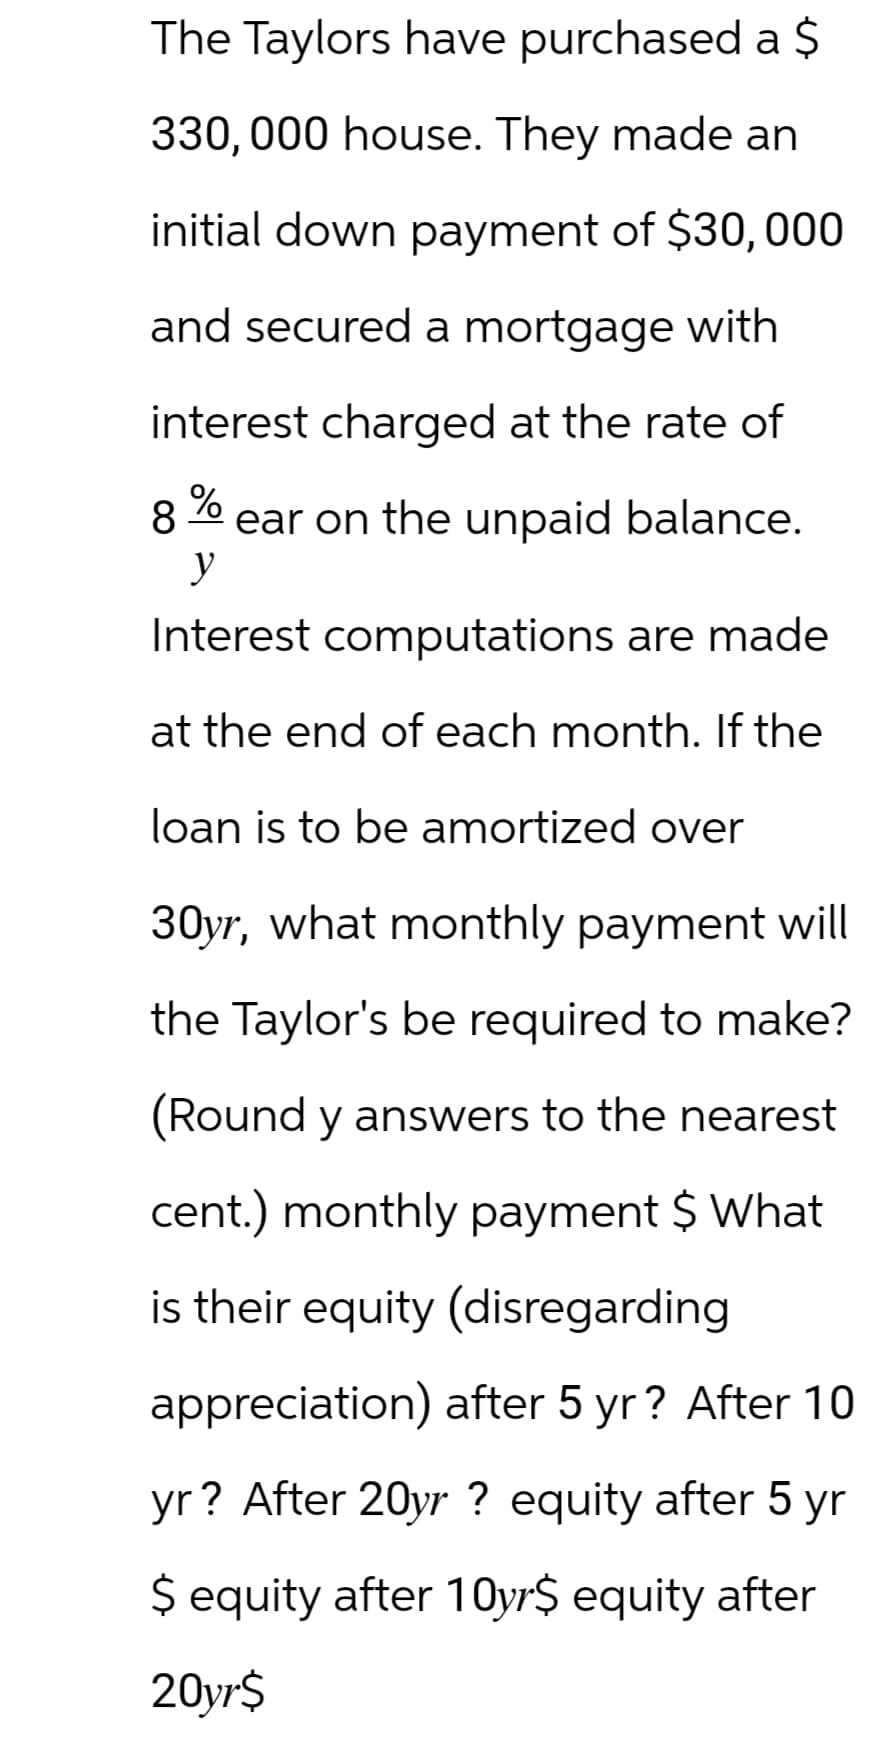 The Taylors have purchased a $
330,000 house. They made an
initial down payment of $30,000
and secured a mortgage with
interest charged at the rate of
8
%
y
ear on the unpaid balance.
Interest computations are made
at the end of each month. If the
loan is to be amortized over
30yr, what monthly payment will
the Taylor's be required to make?
(Round y answers to the nearest
cent.) monthly payment $ What
is their equity (disregarding
appreciation) after 5 yr? After 10
yr? After 20yr ? equity after 5 yr
$ equity after 10yr‍$ equity after
20yr$